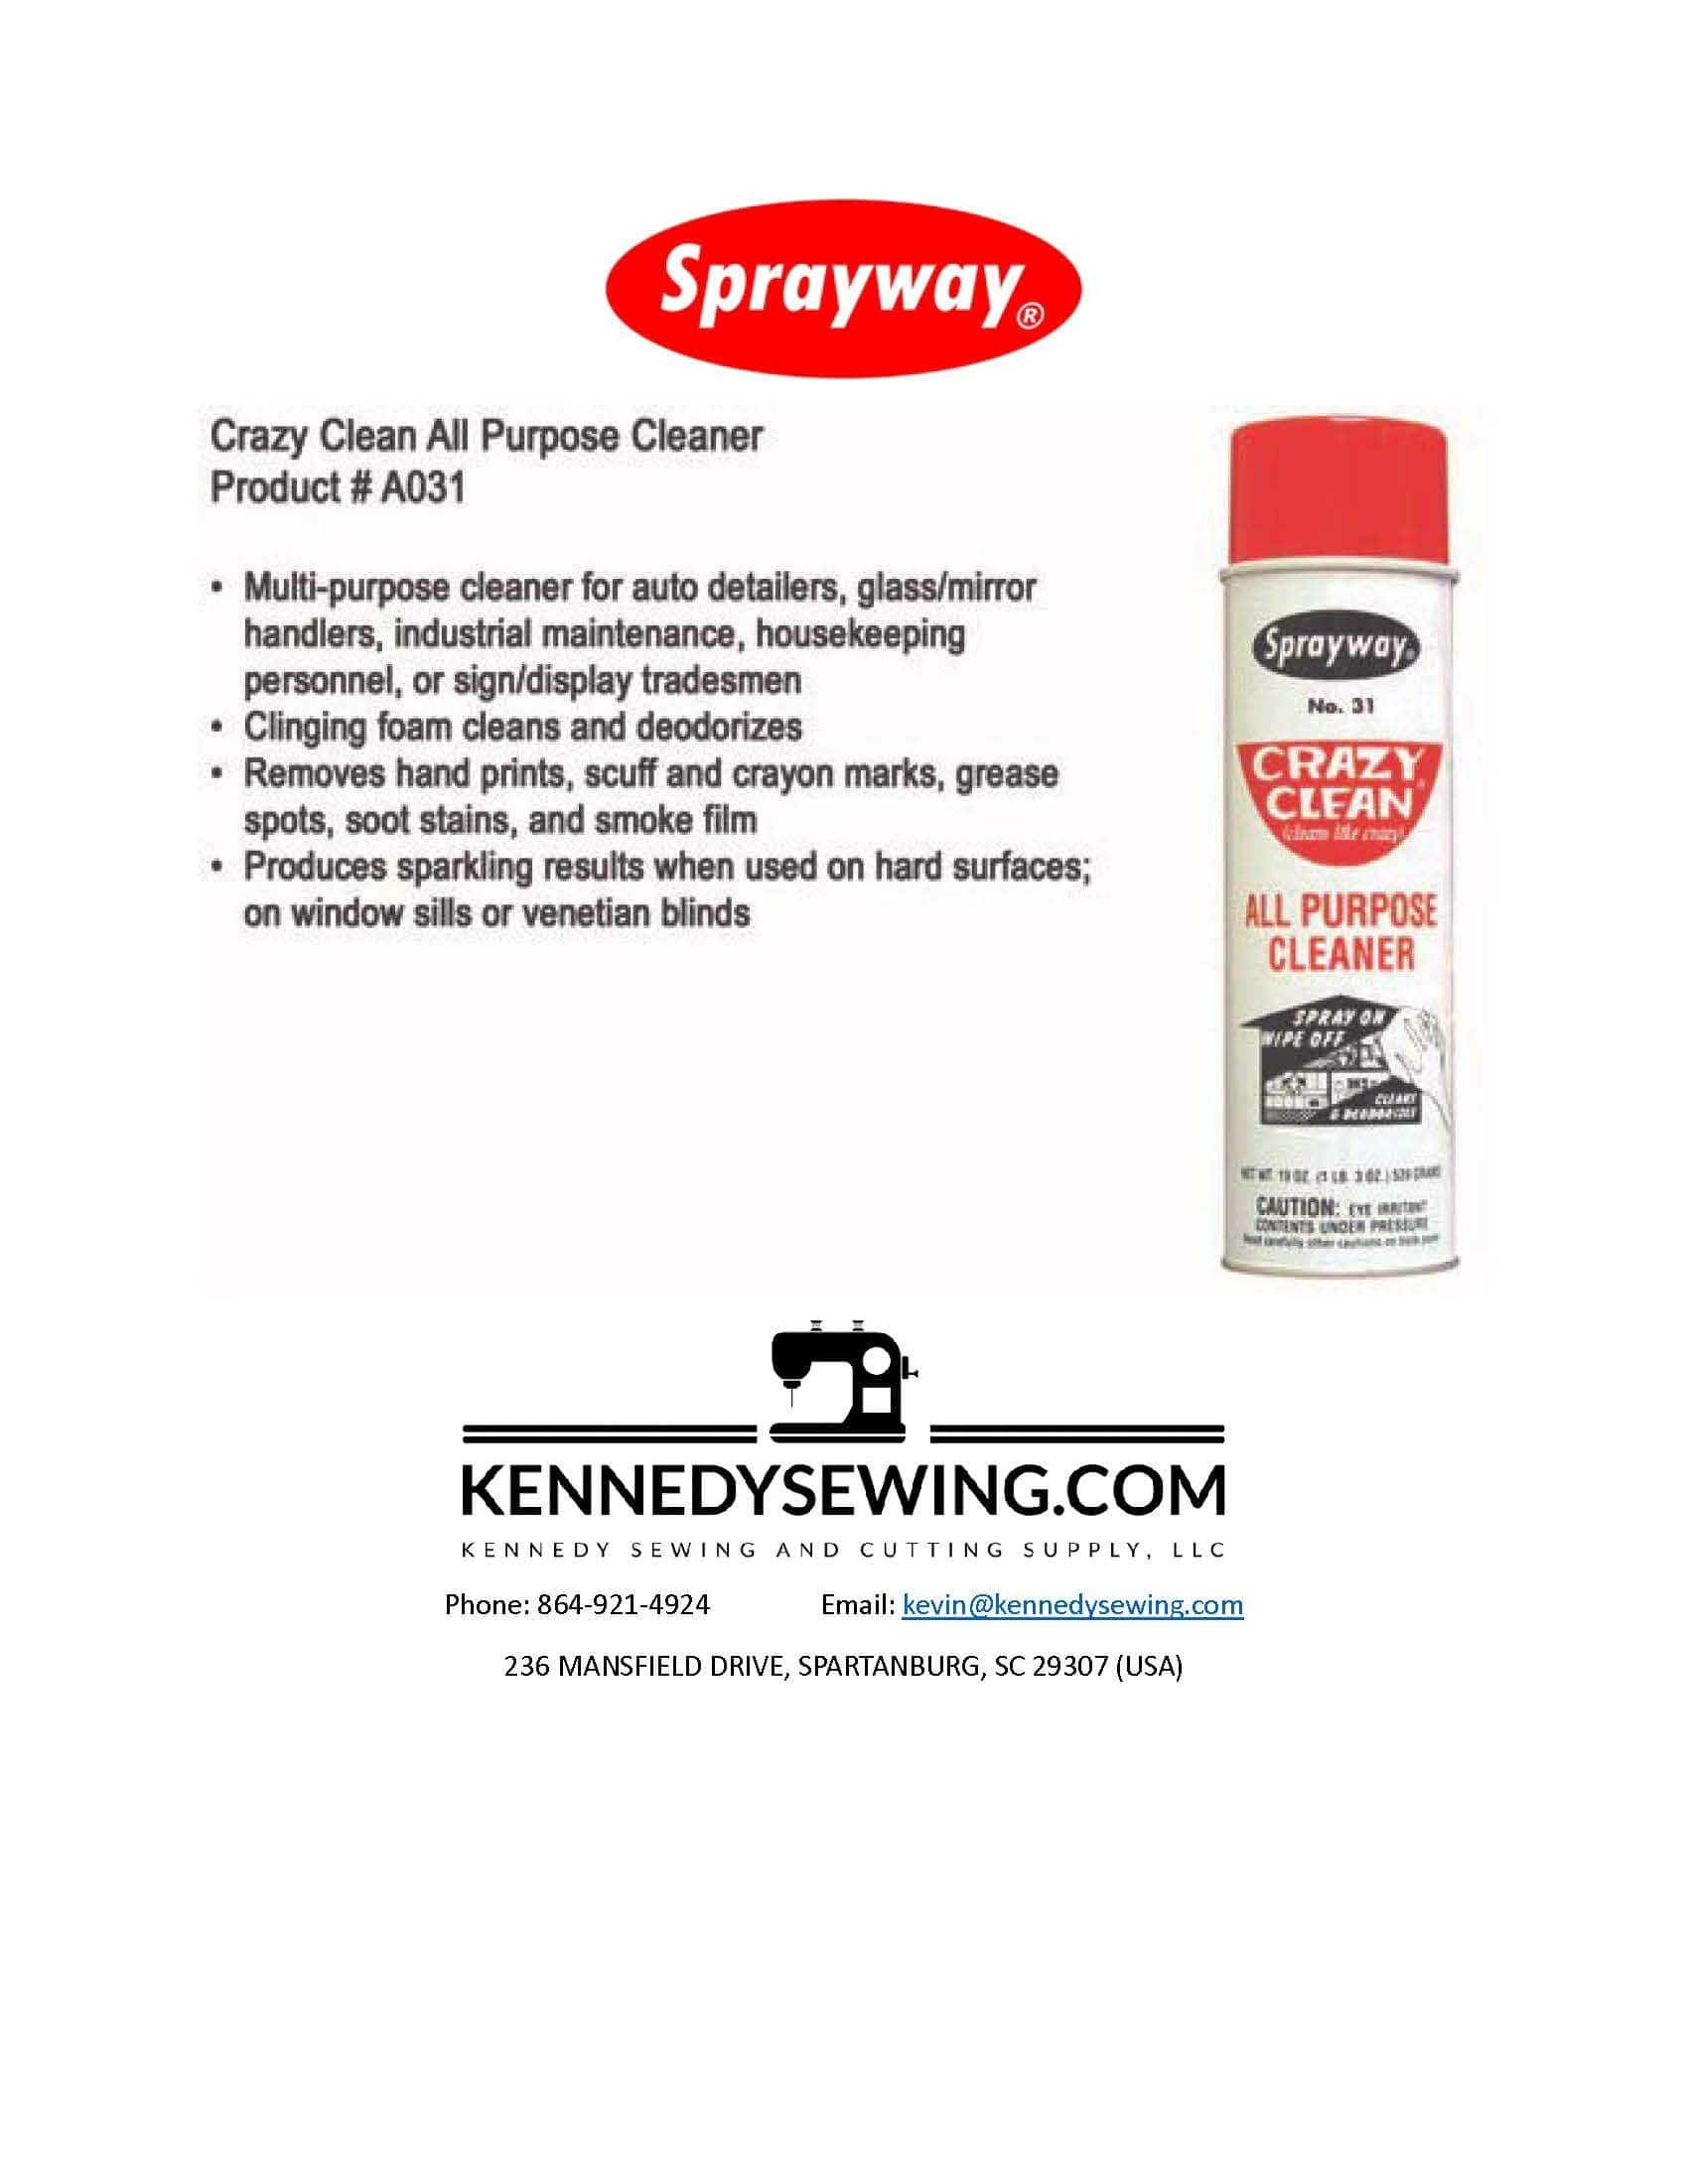 SPRAYWAY A031 CRAZY CLEAN ALL PURPOSE CLEANER